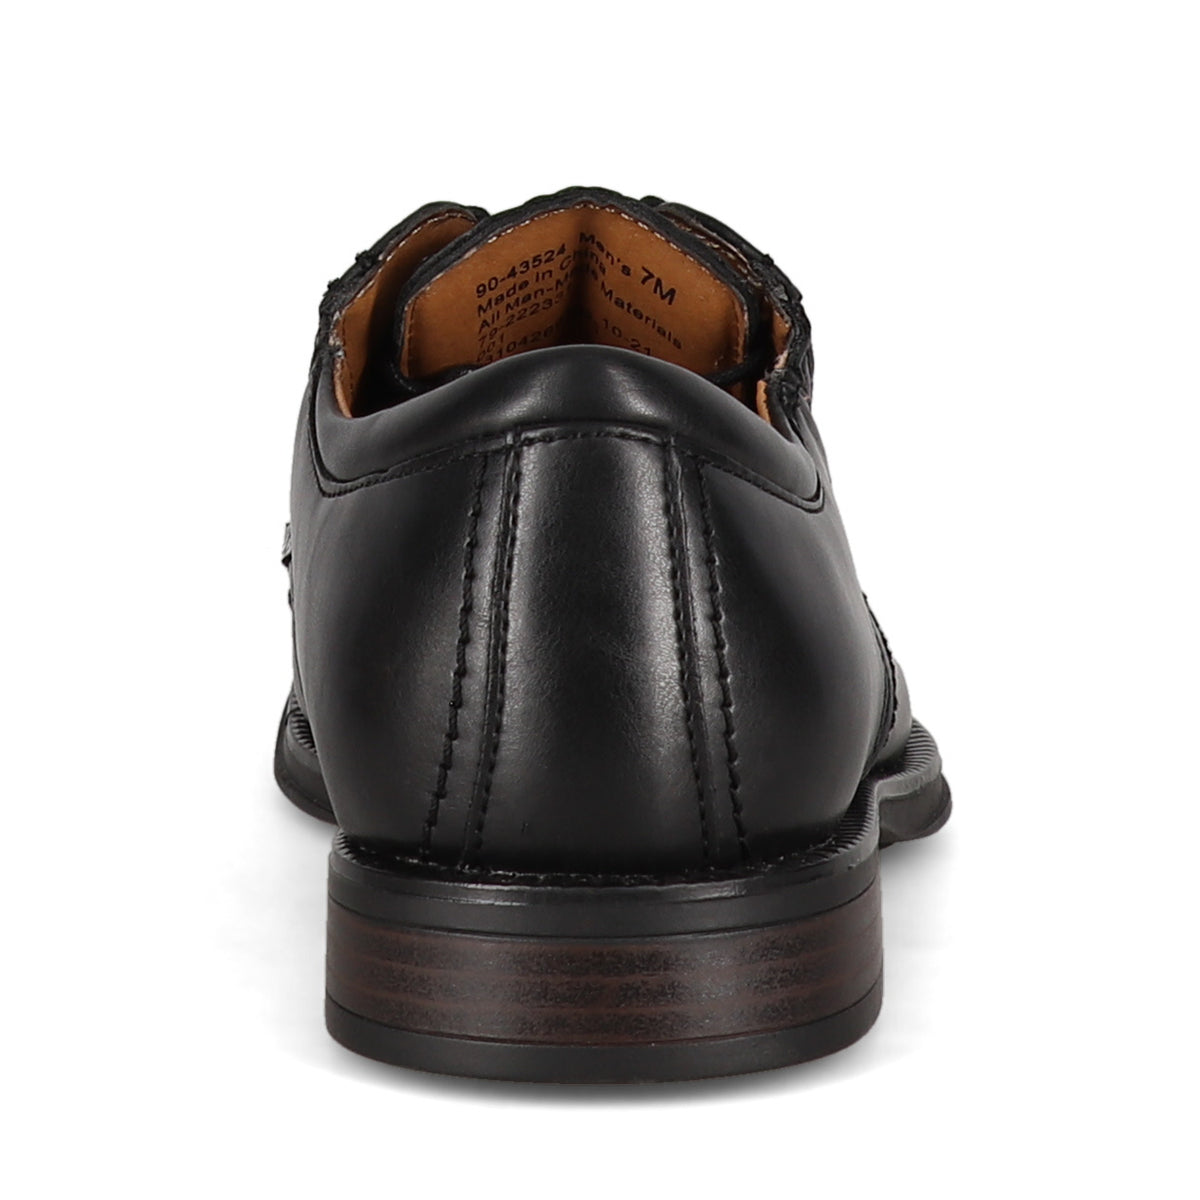 Dockers Shoes Geyer Black Shoes